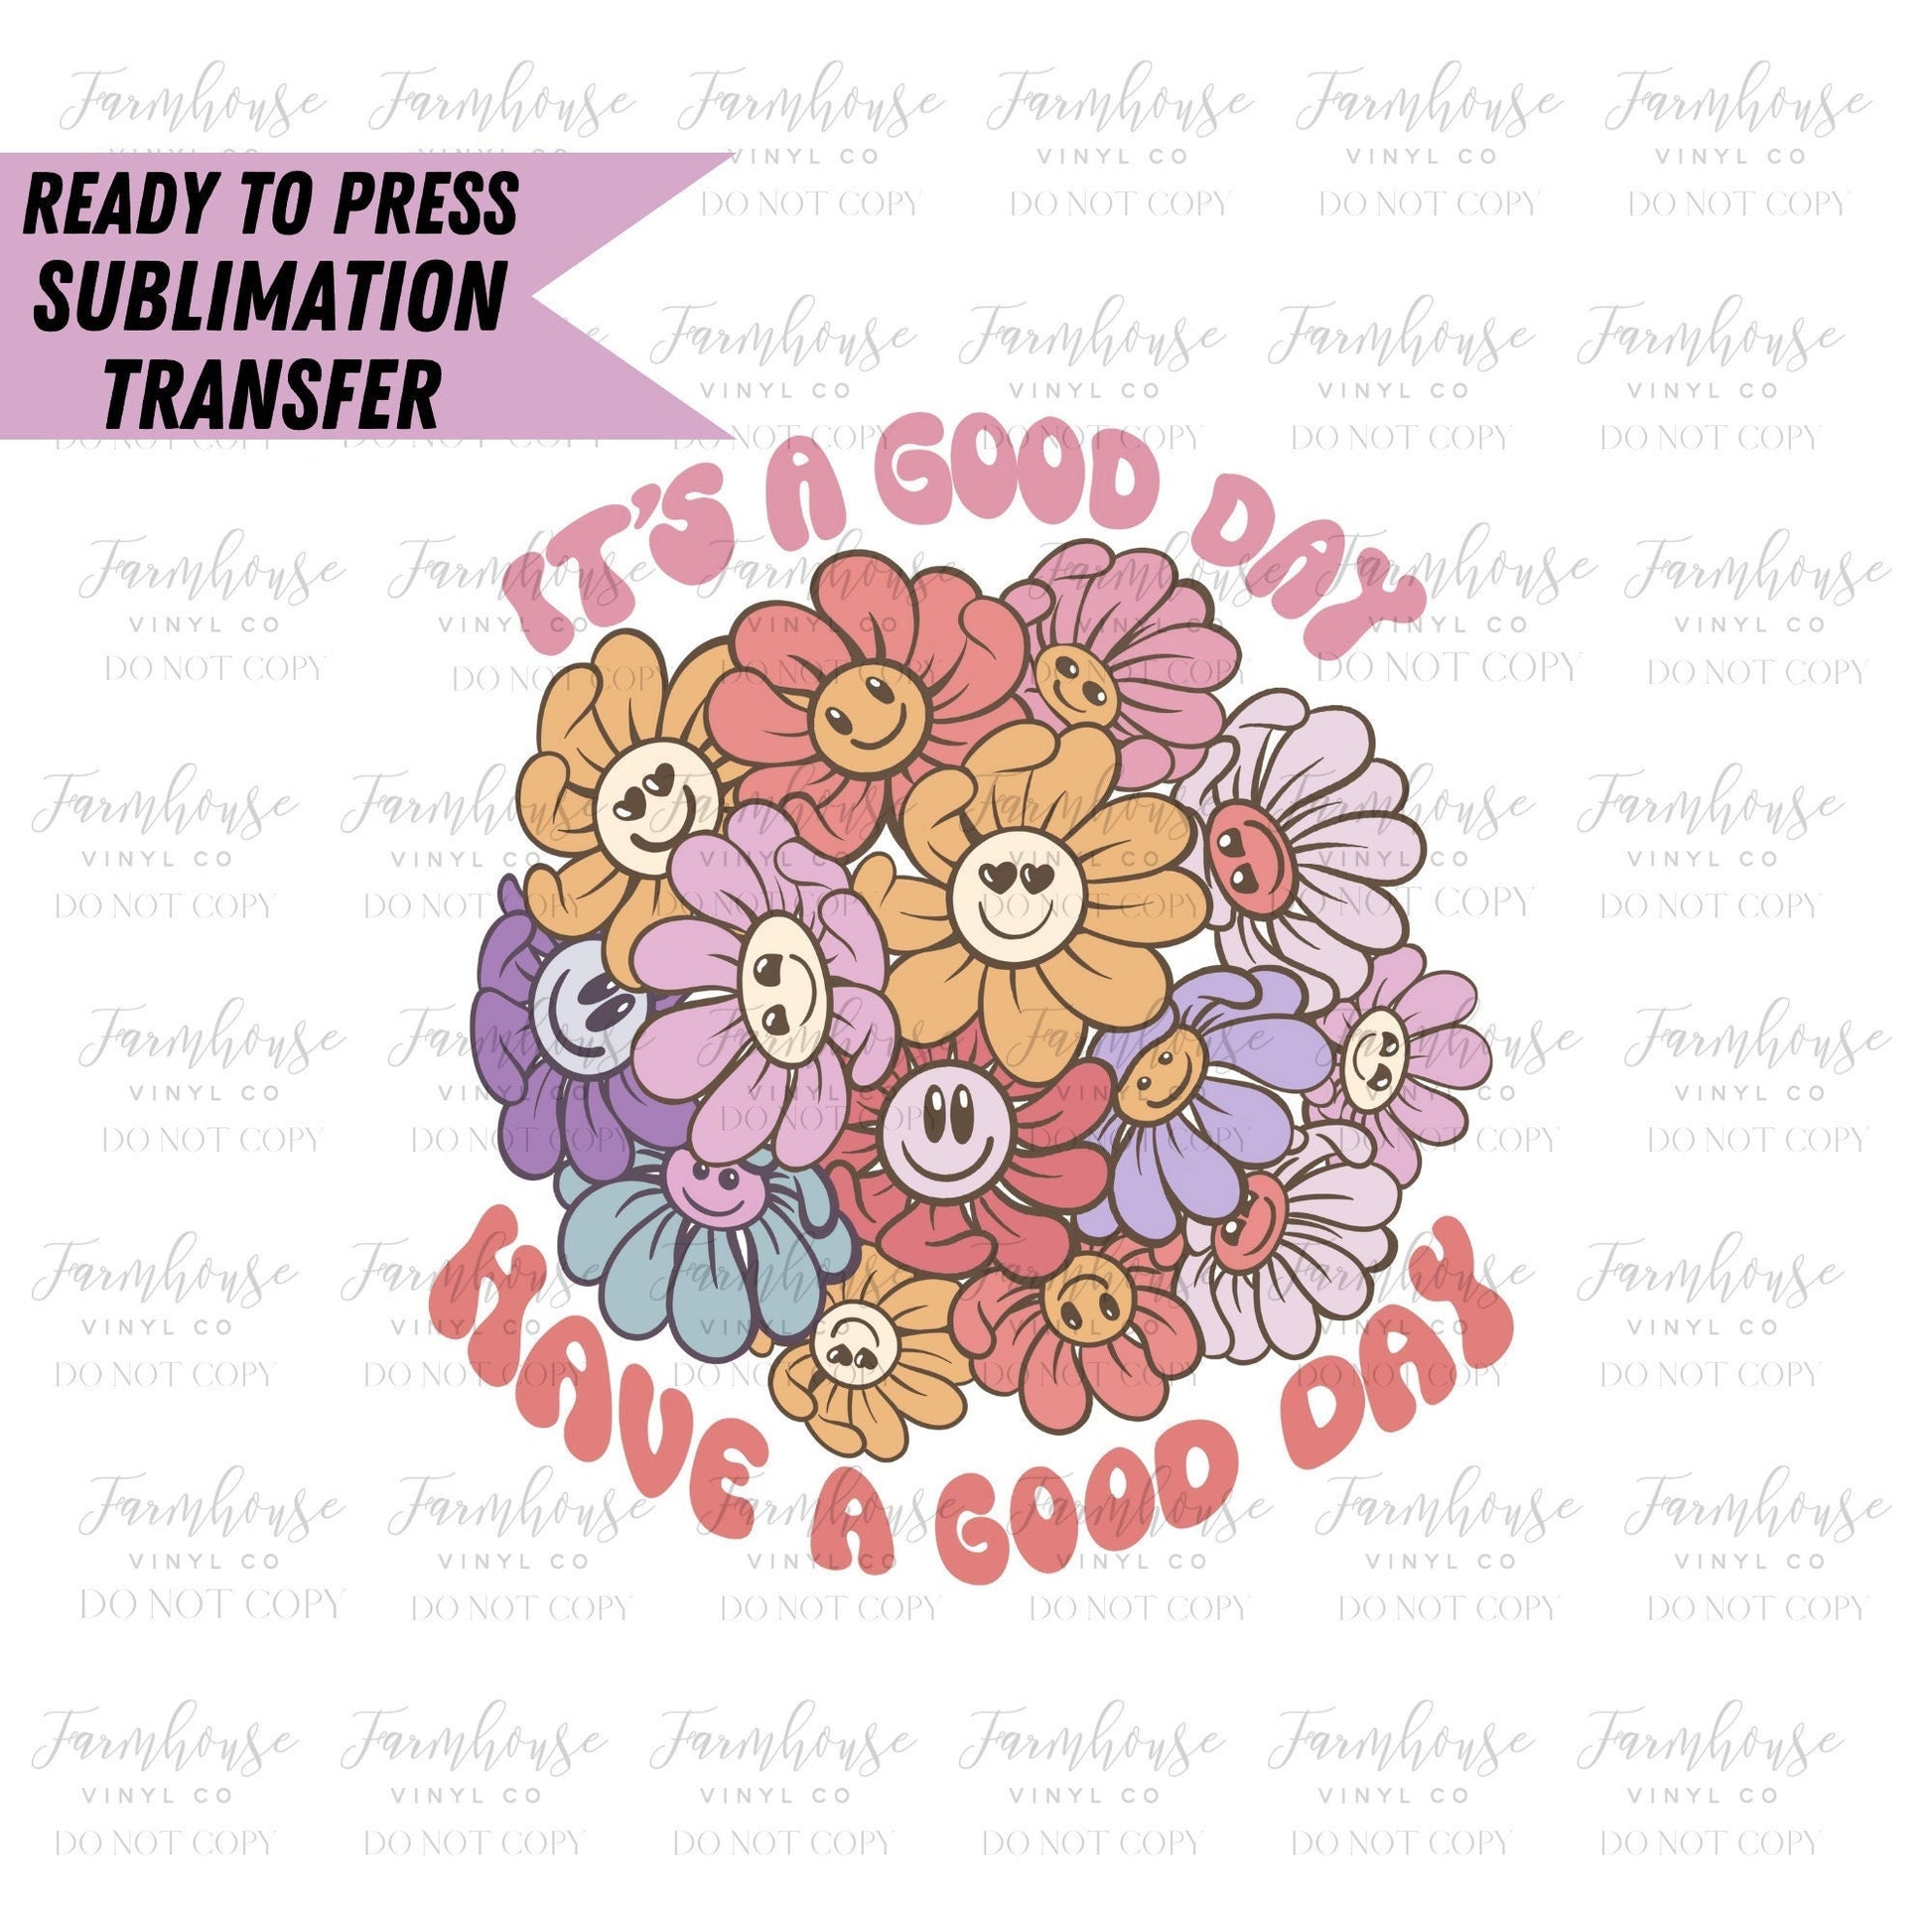 It's A Good Day Have A Good Day, Ready to Press Sublimation Transfer, Sublimation Transfers, Heat Transfer, Happy Retro Floral, Pastel Face - Farmhouse Vinyl Co